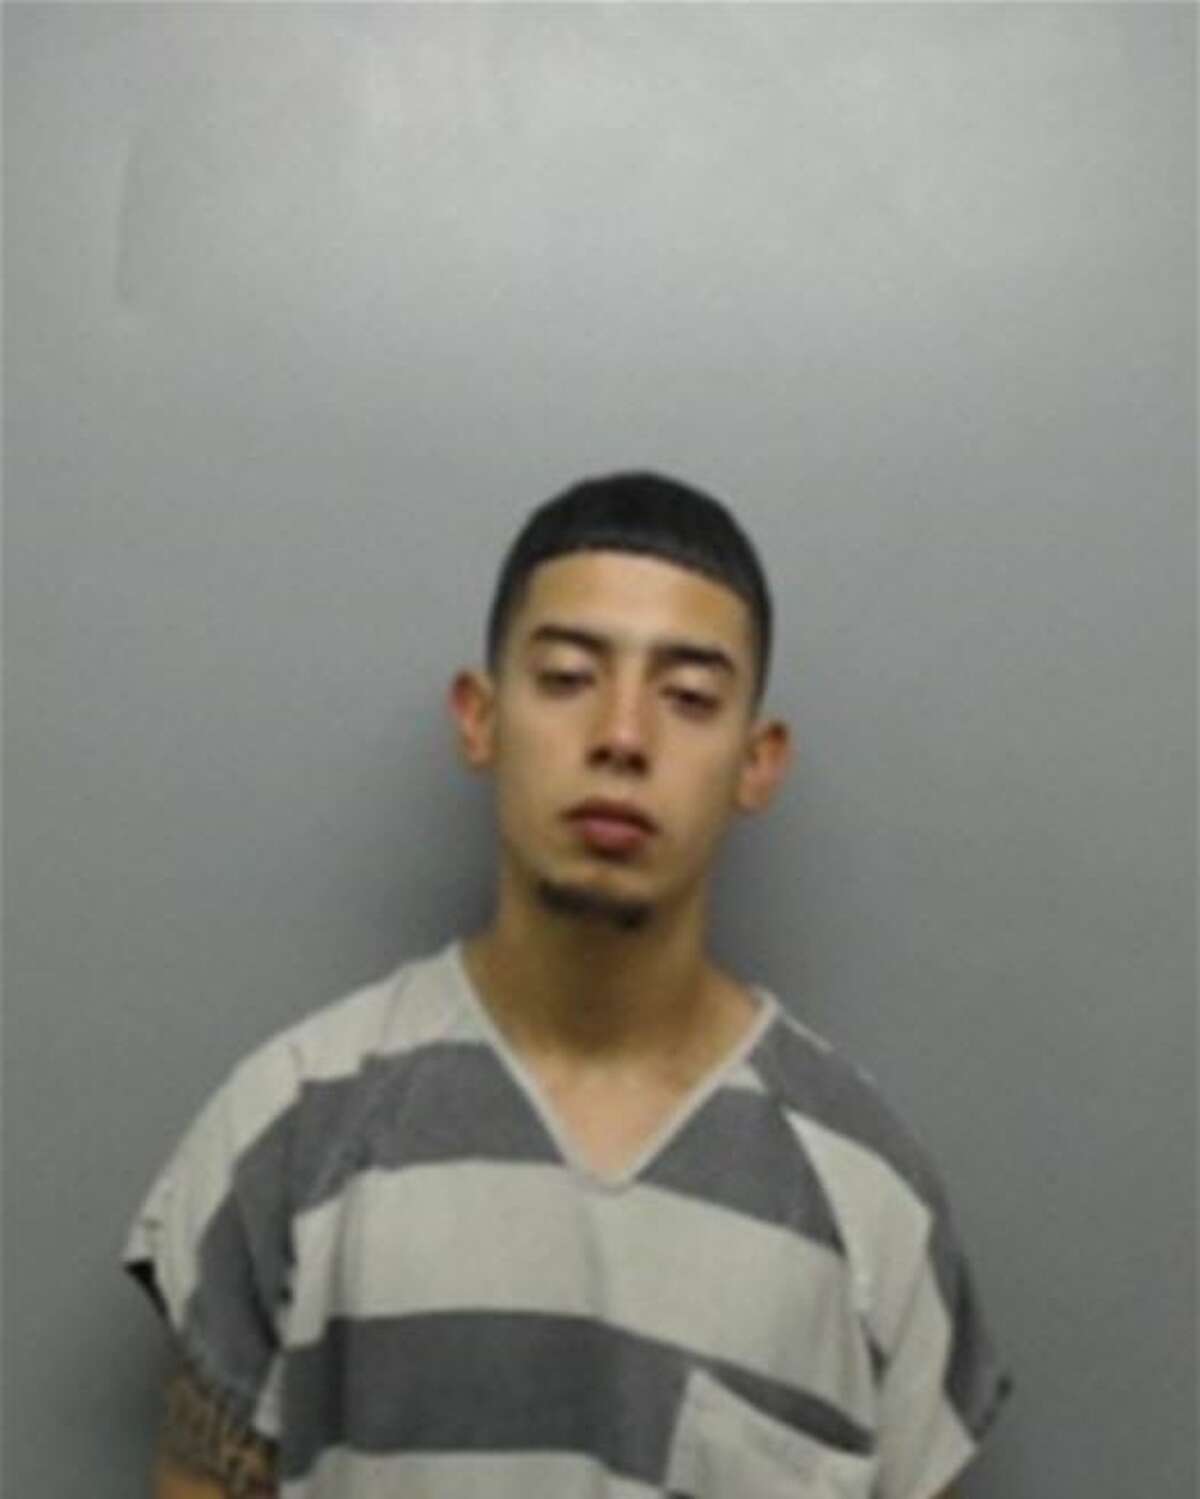 Genaro del Bosque, 19, was charged with felony possession of marijuana.